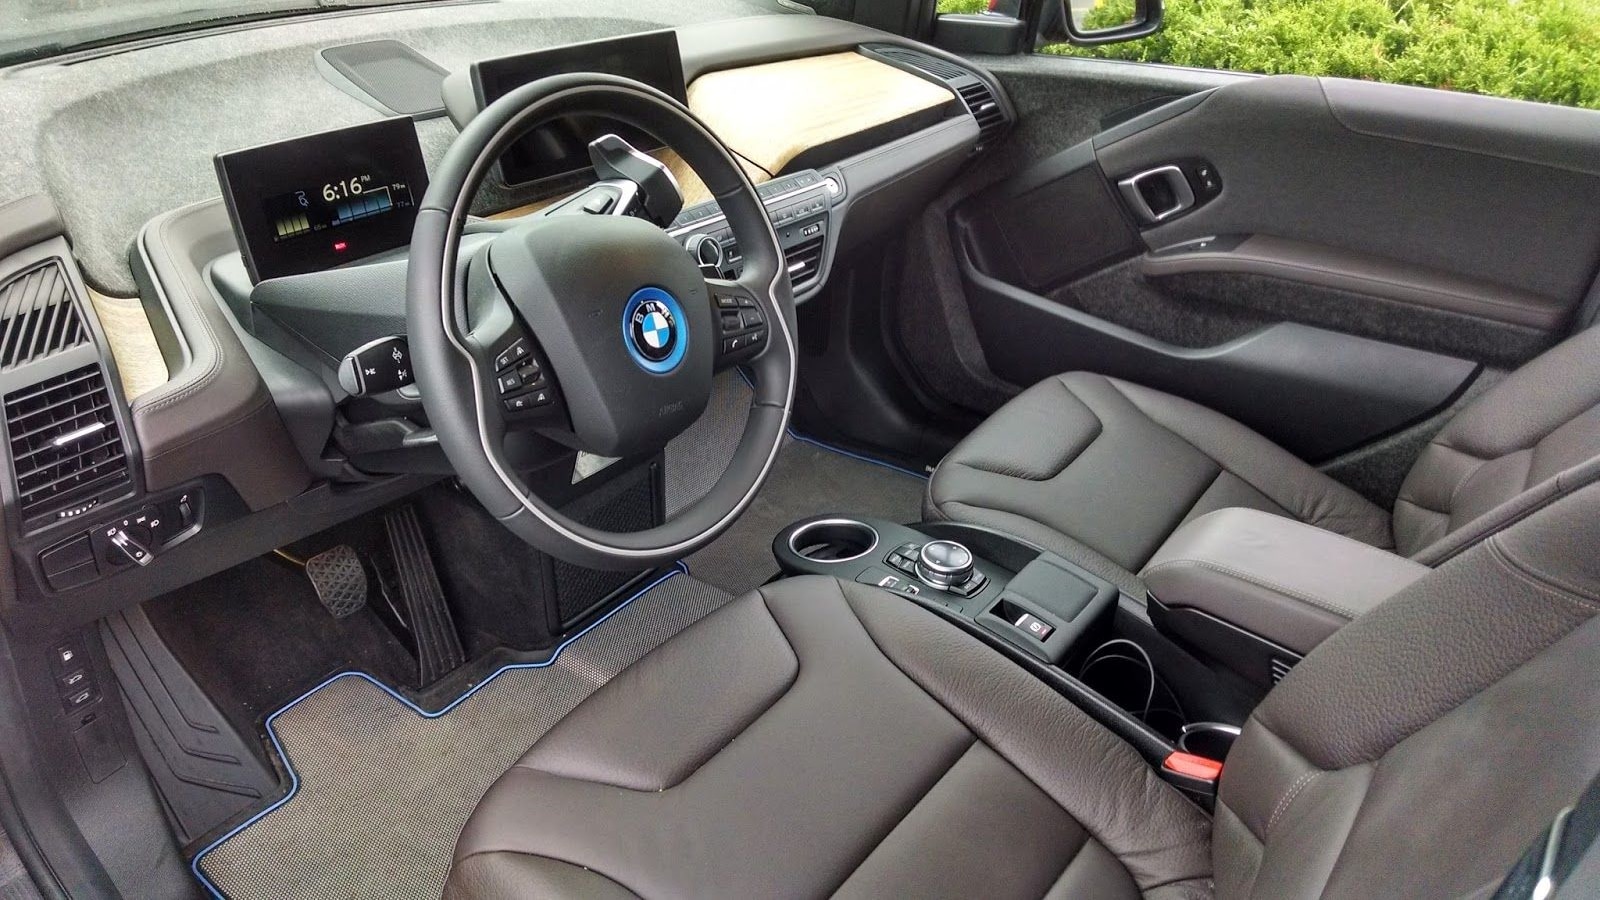 2014 BMW i3 REx range-extended electric car at 3 years   [photo: owner Tom Moloughney]